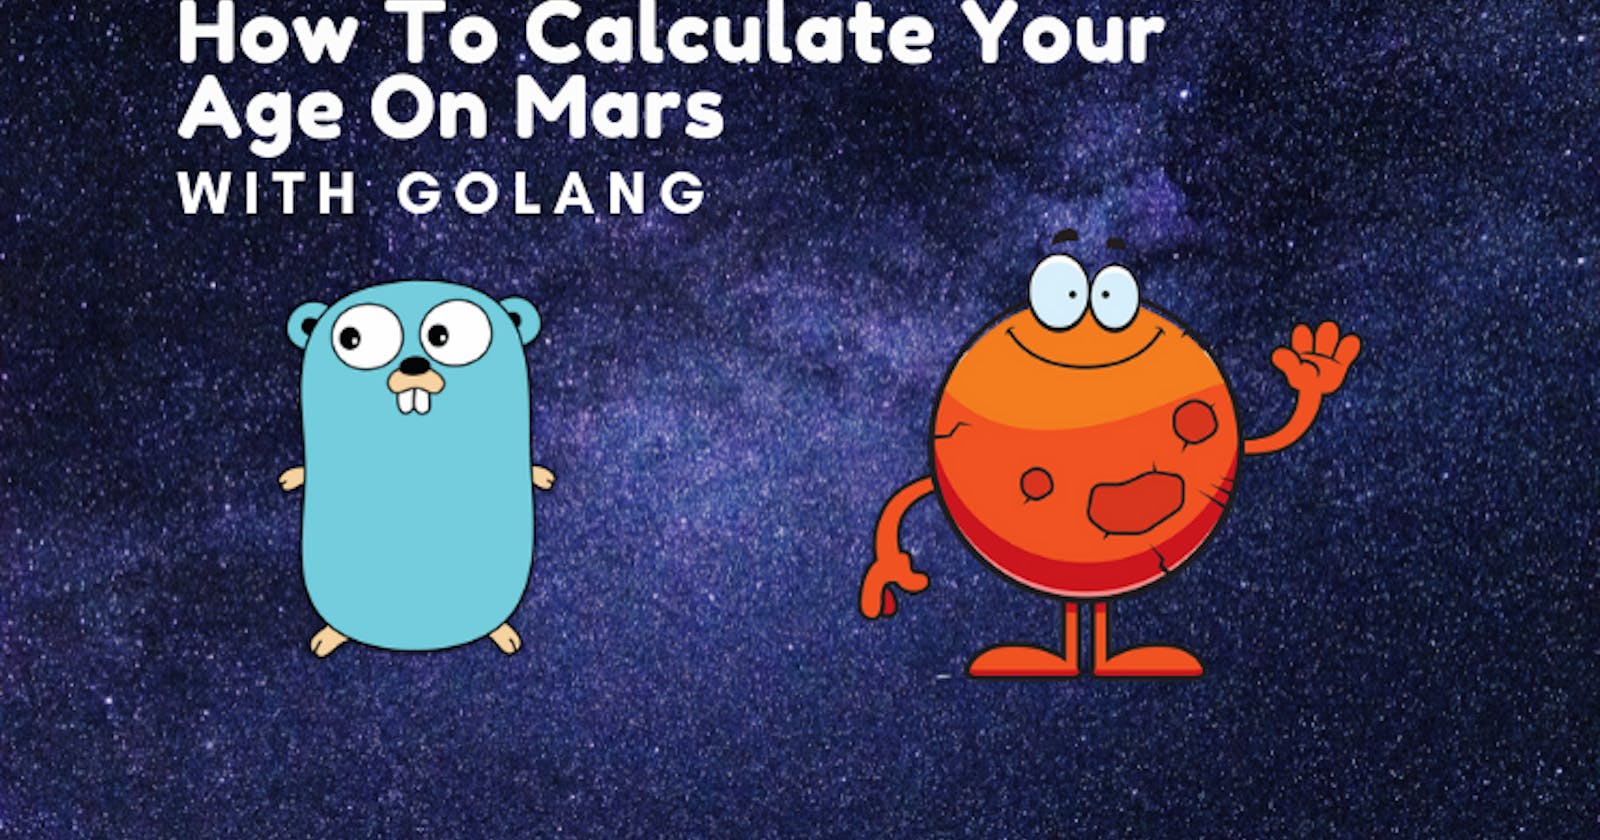 How to Calculate Your Age on Mars With GOLANG